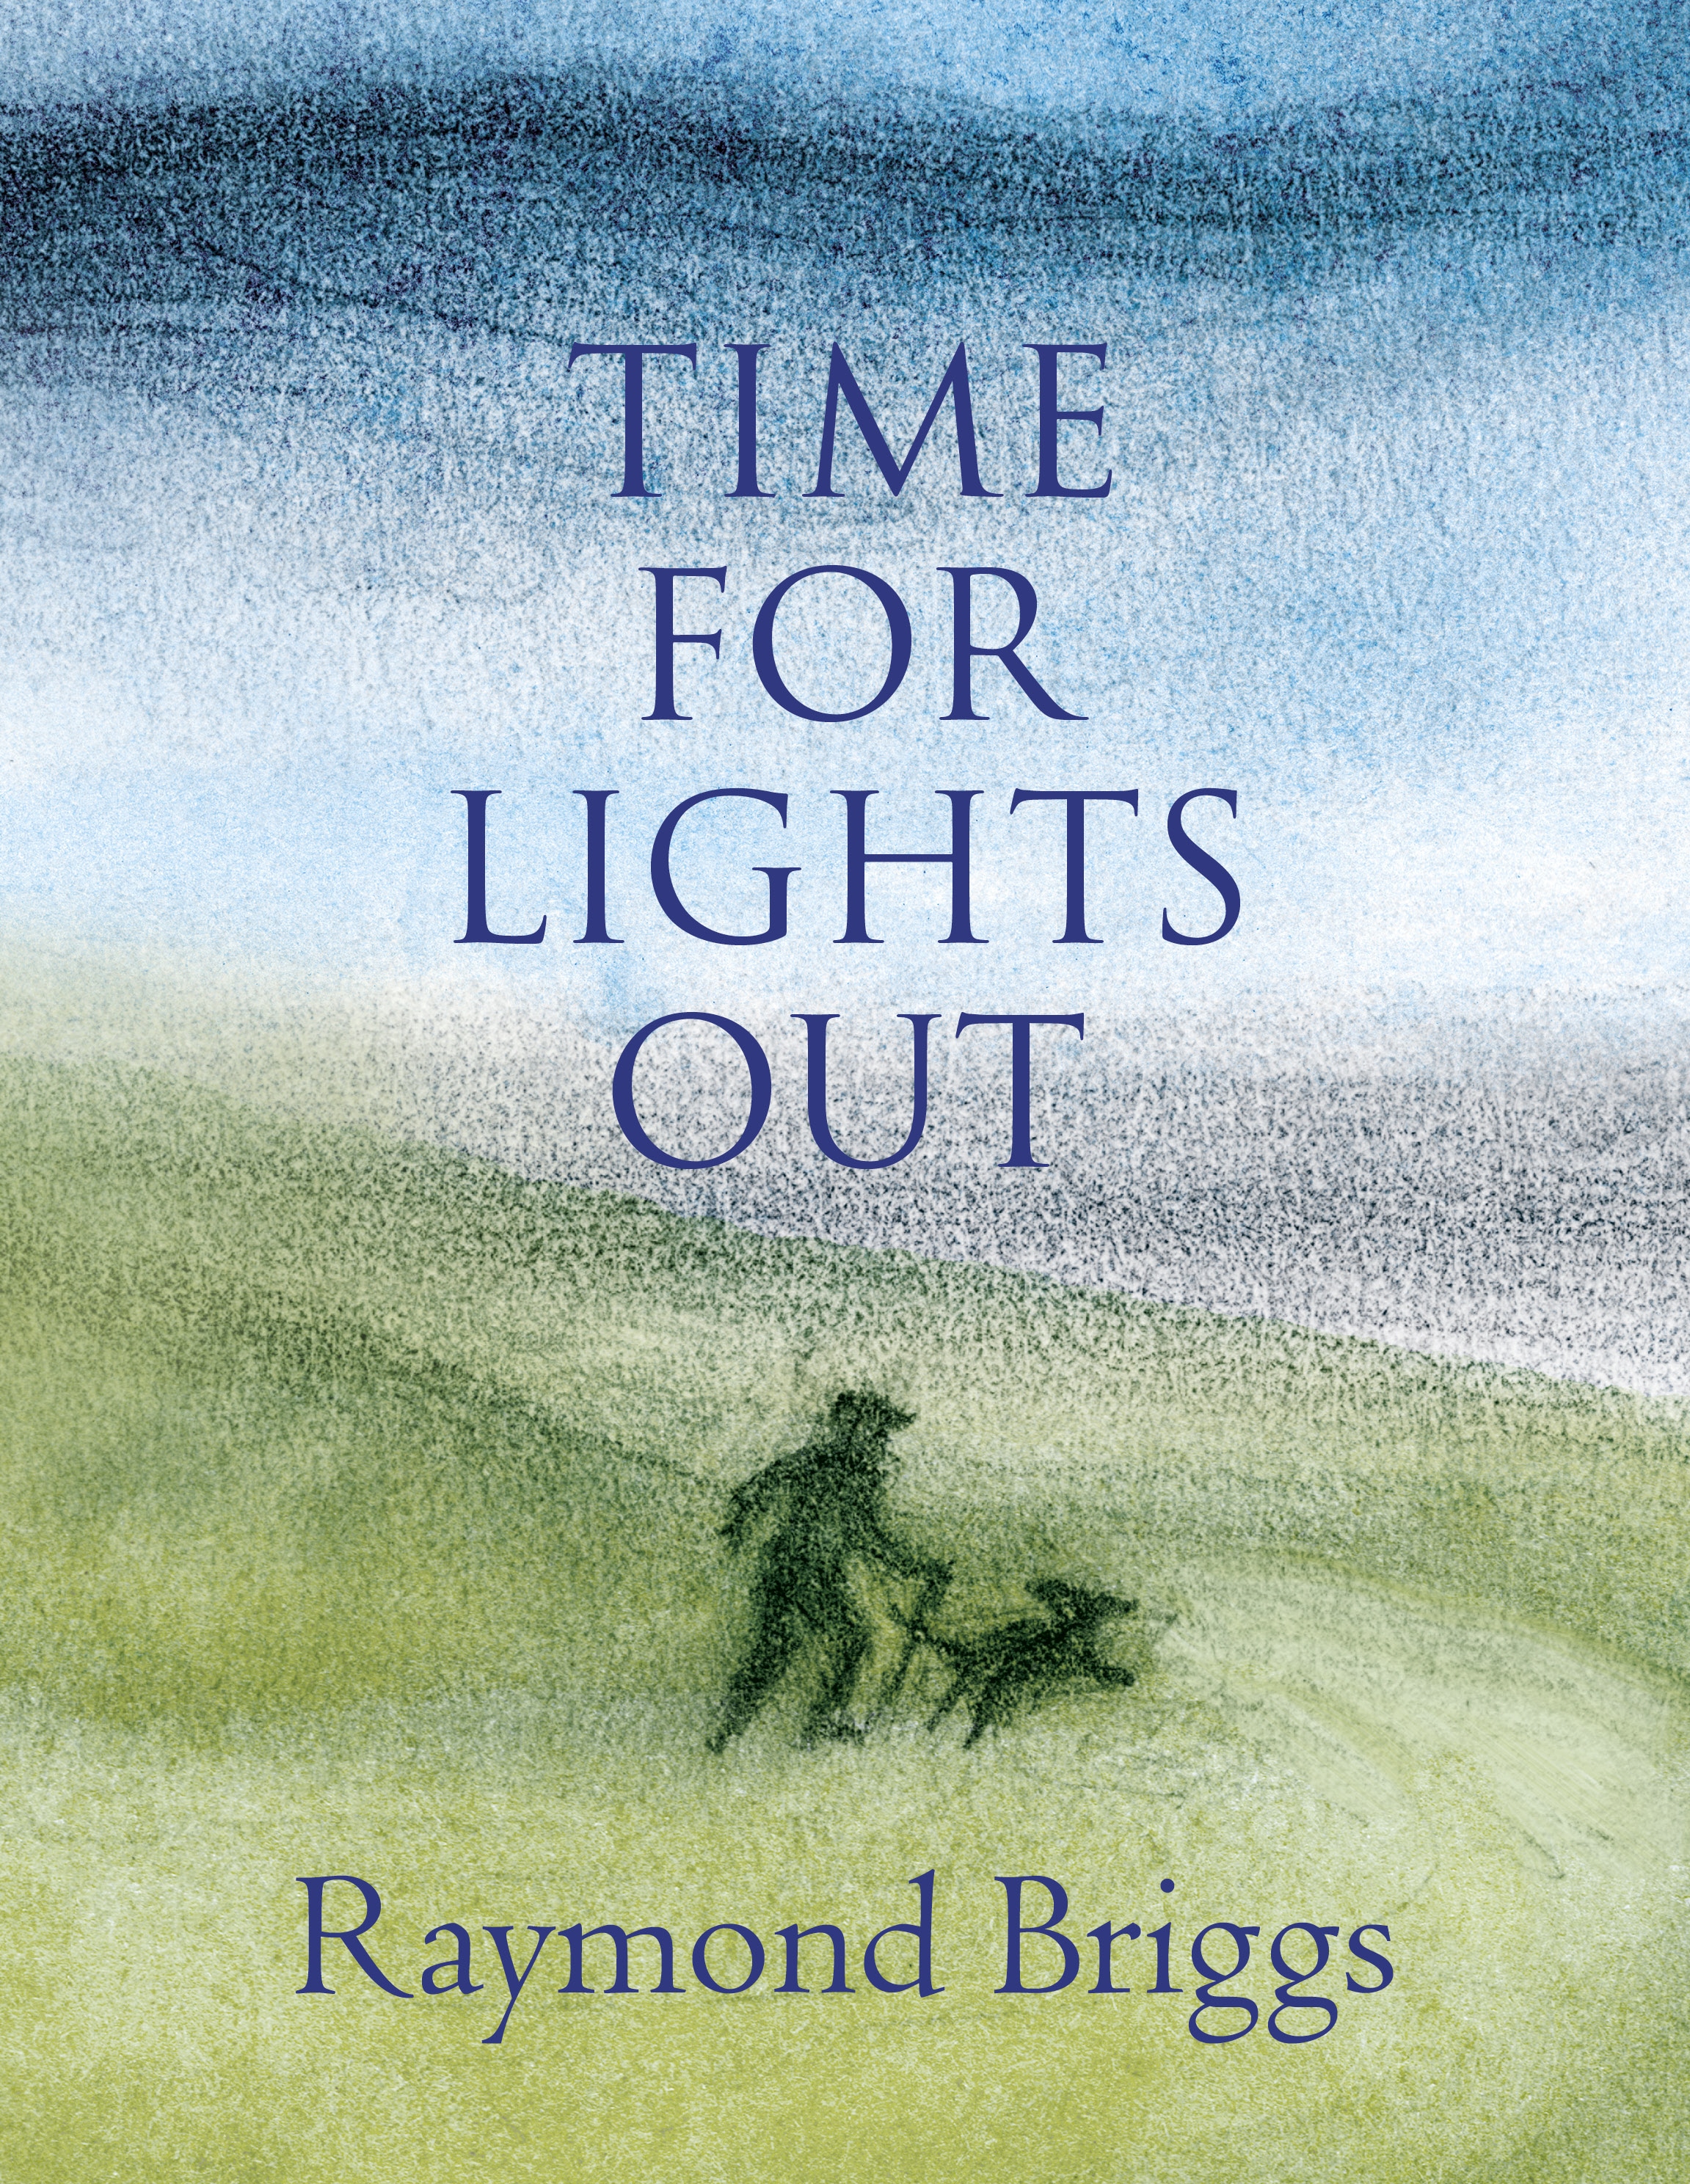 Book “Time For Lights Out” by Raymond Briggs — November 14, 2019